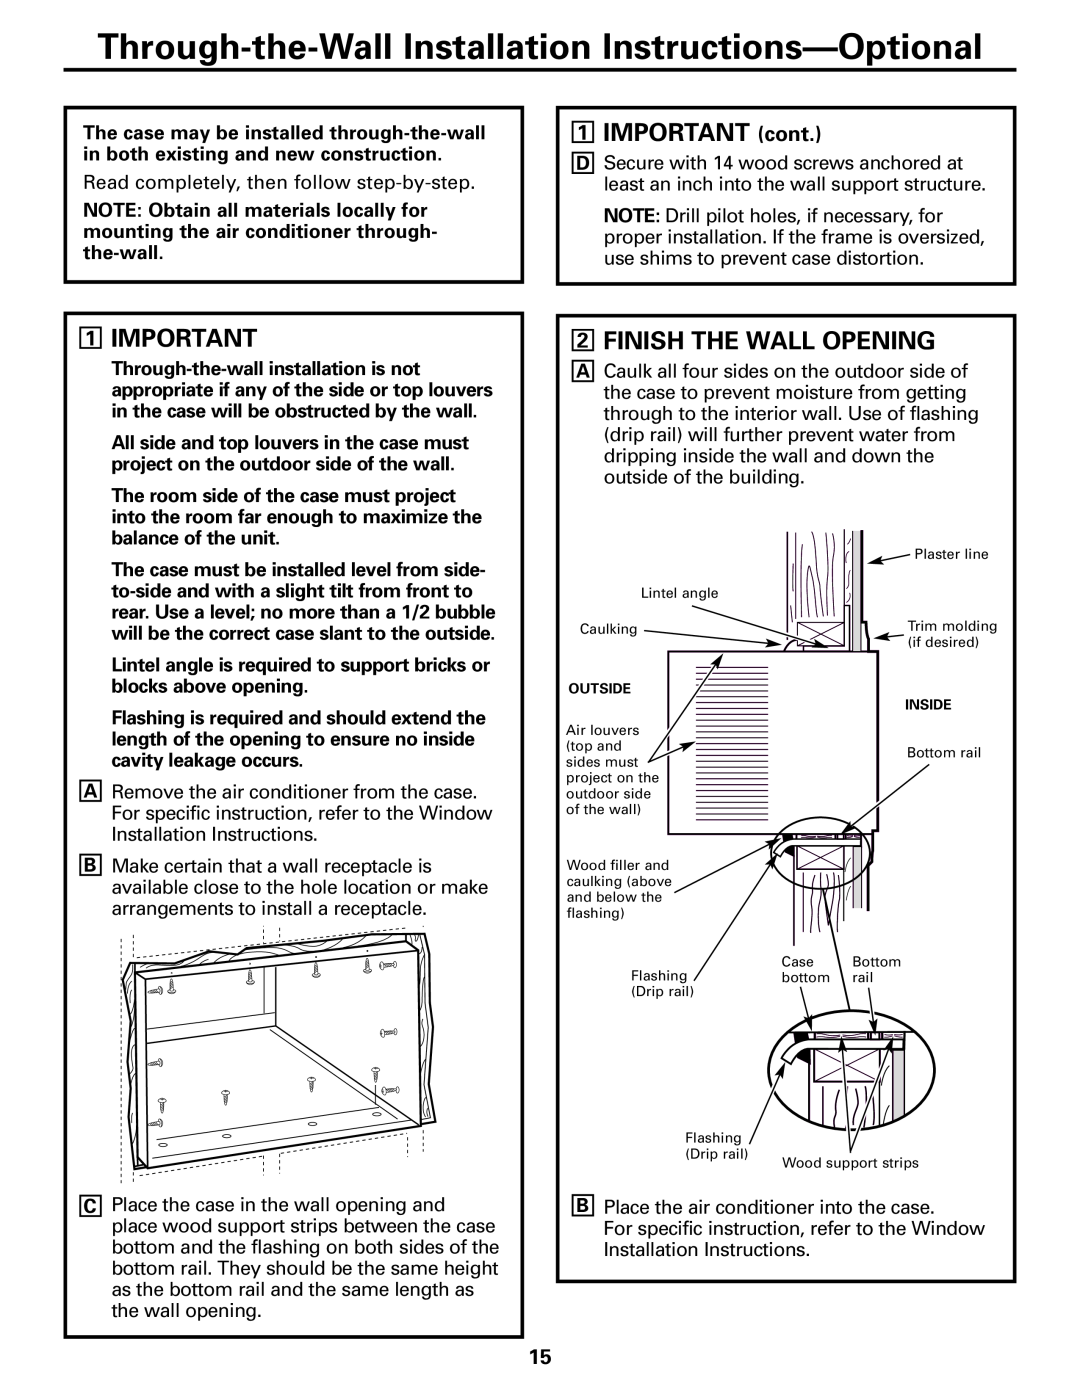 GE ASQ12, ASV10, ASM10*, ASM08*, ASQ10, ASQ14 installation instructions IMPORTANT cont, 1IMPORTANT, 2FINISH THE WALL OPENING 